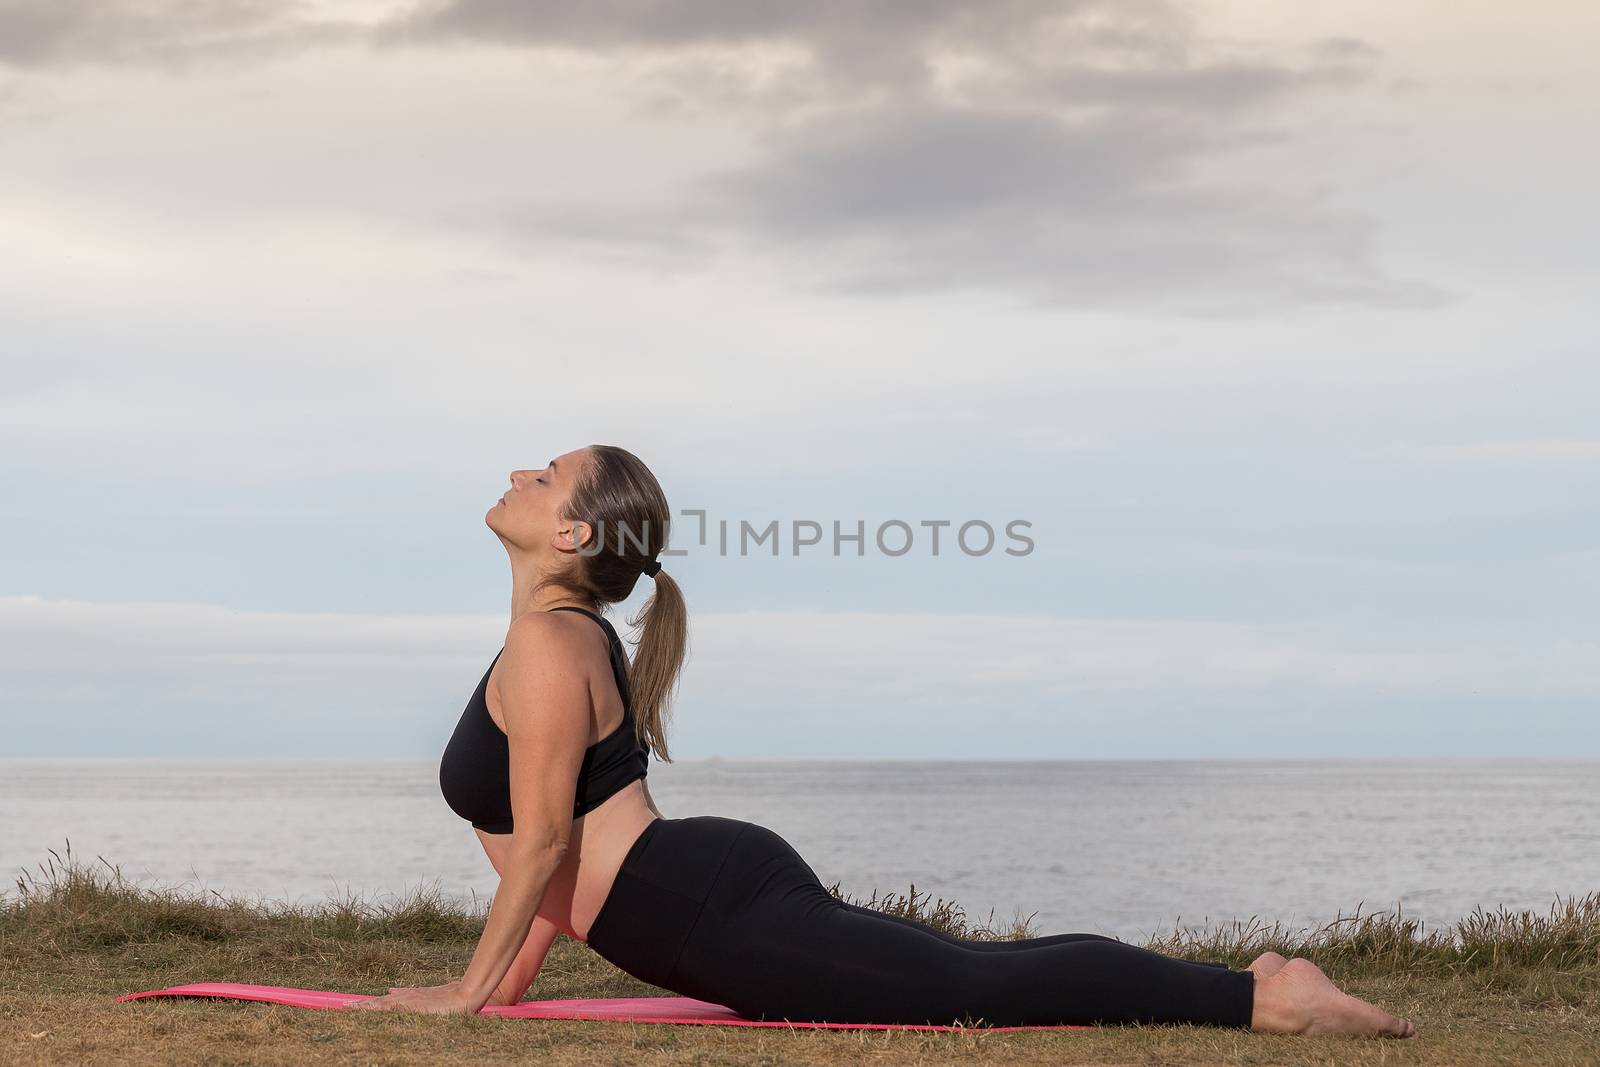 Woman in black sportswear doing pilates outdoor on a pink mat with the sea in the background.